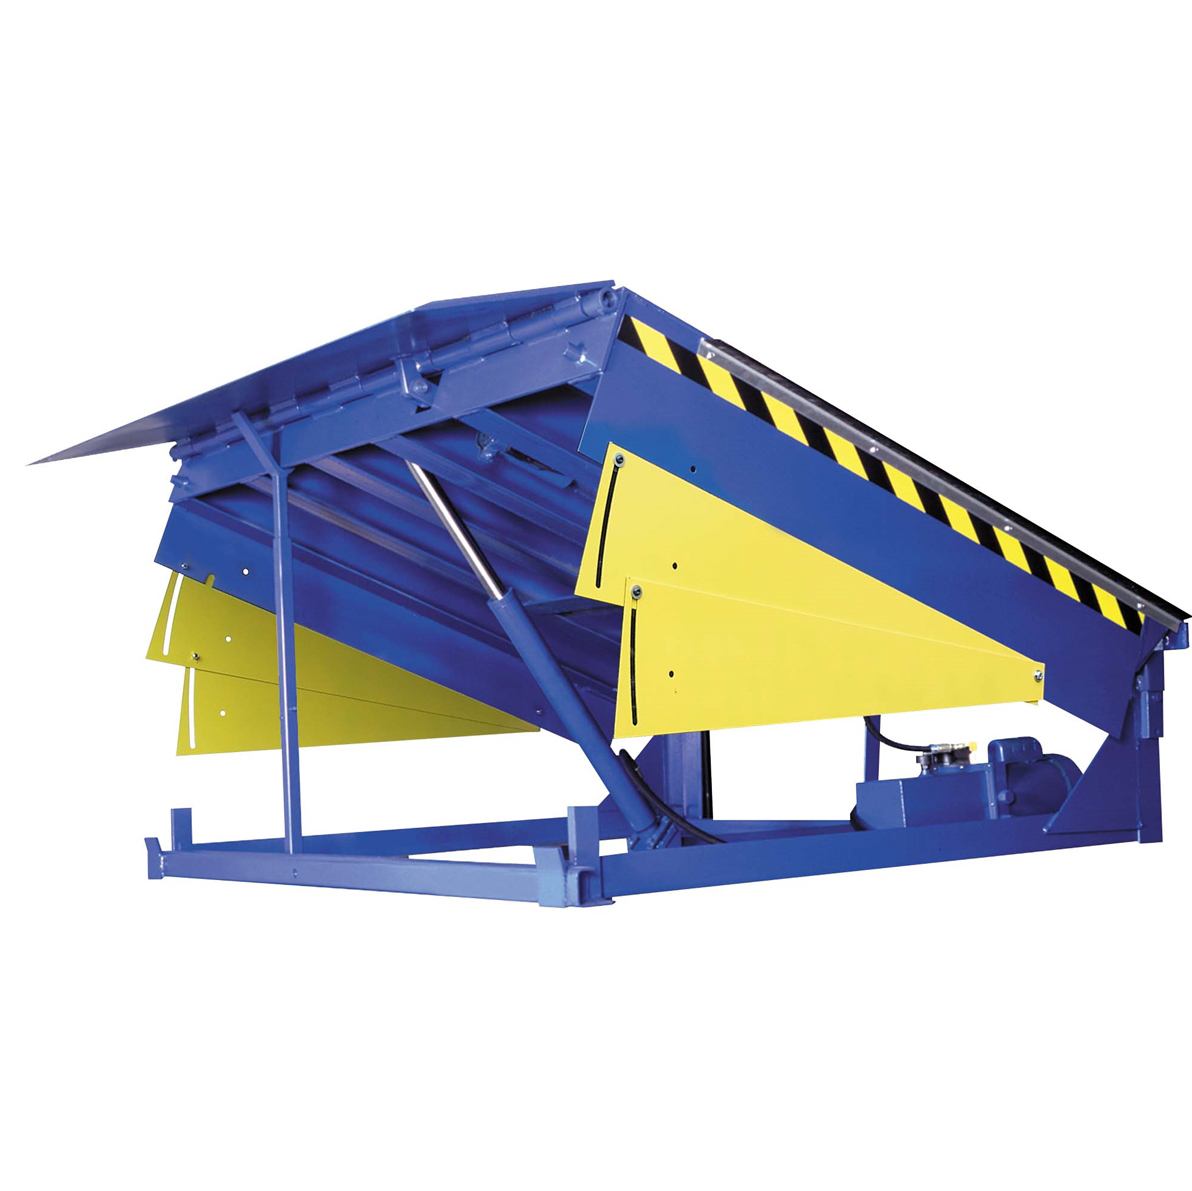 What are the difference between Mechanical and Hydraulic Dock Levelers